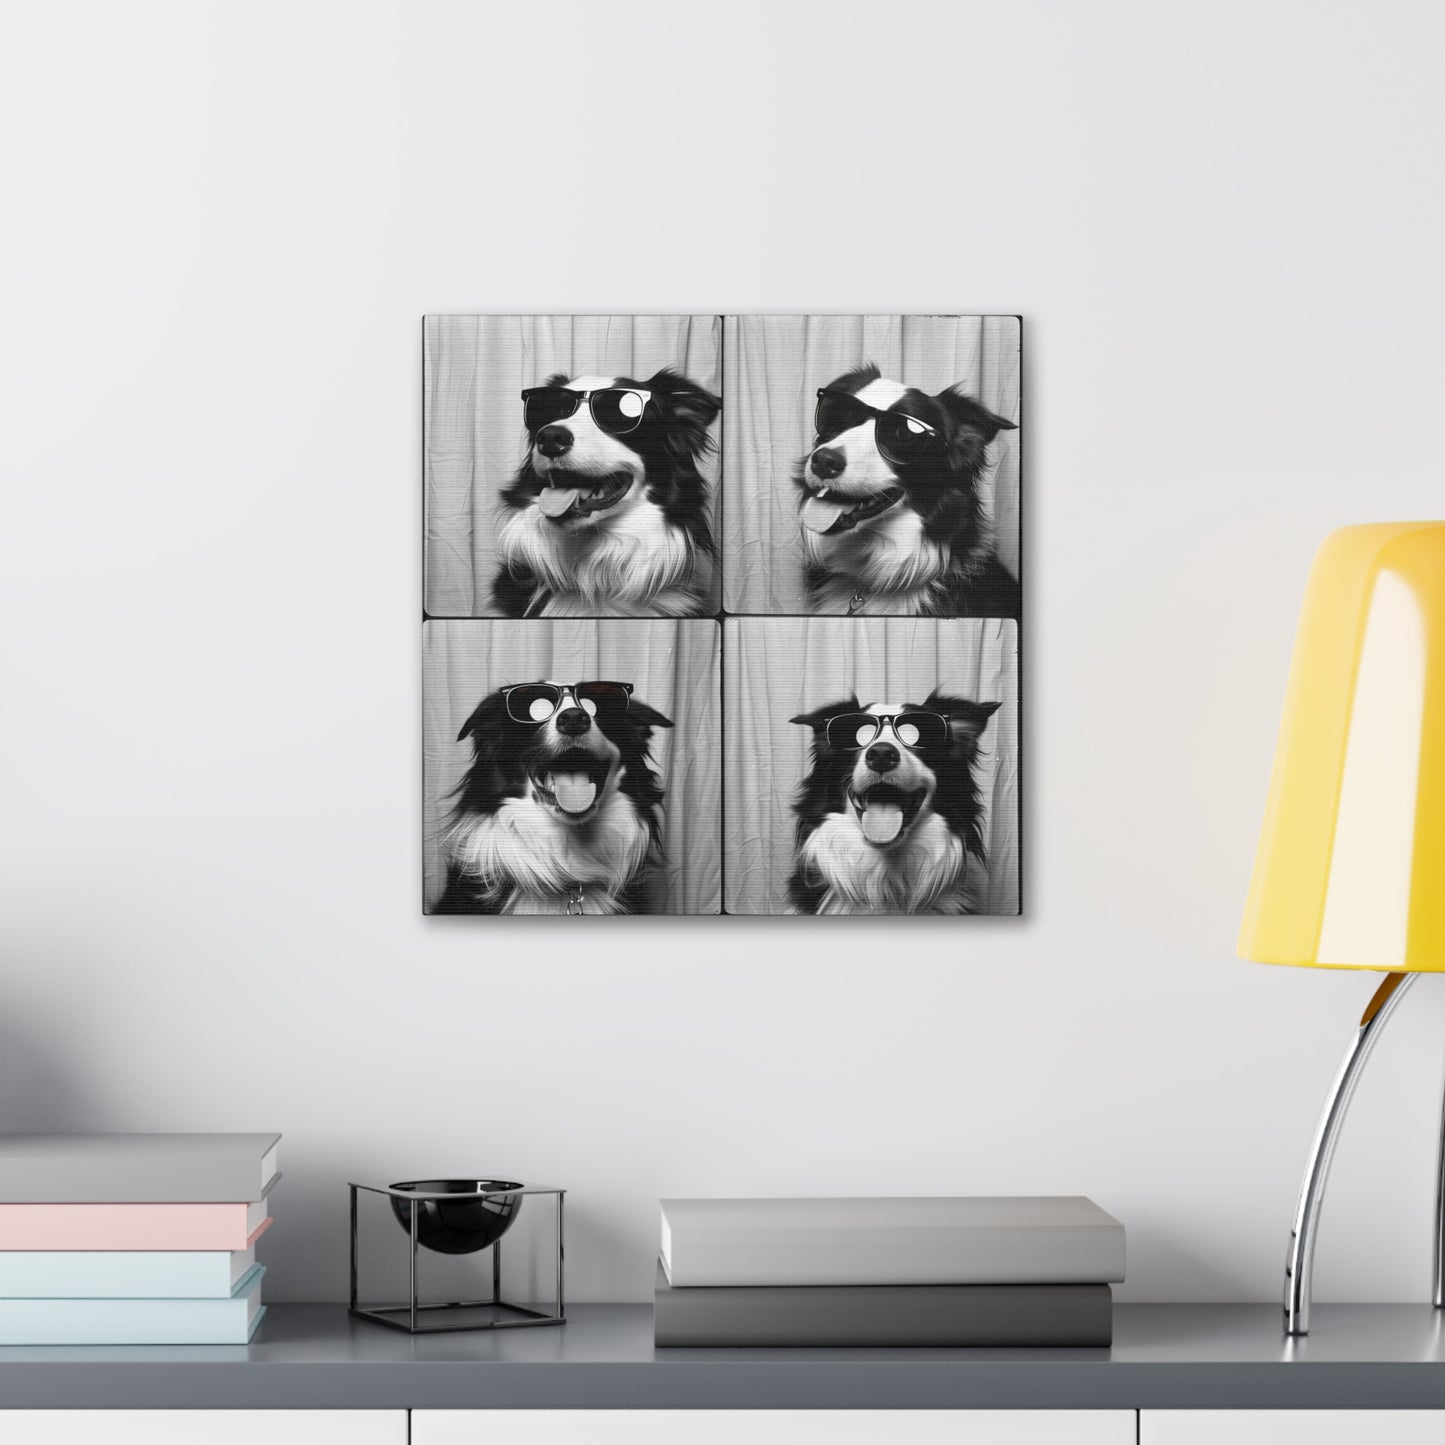 Border Collie Photo Booth Canvas